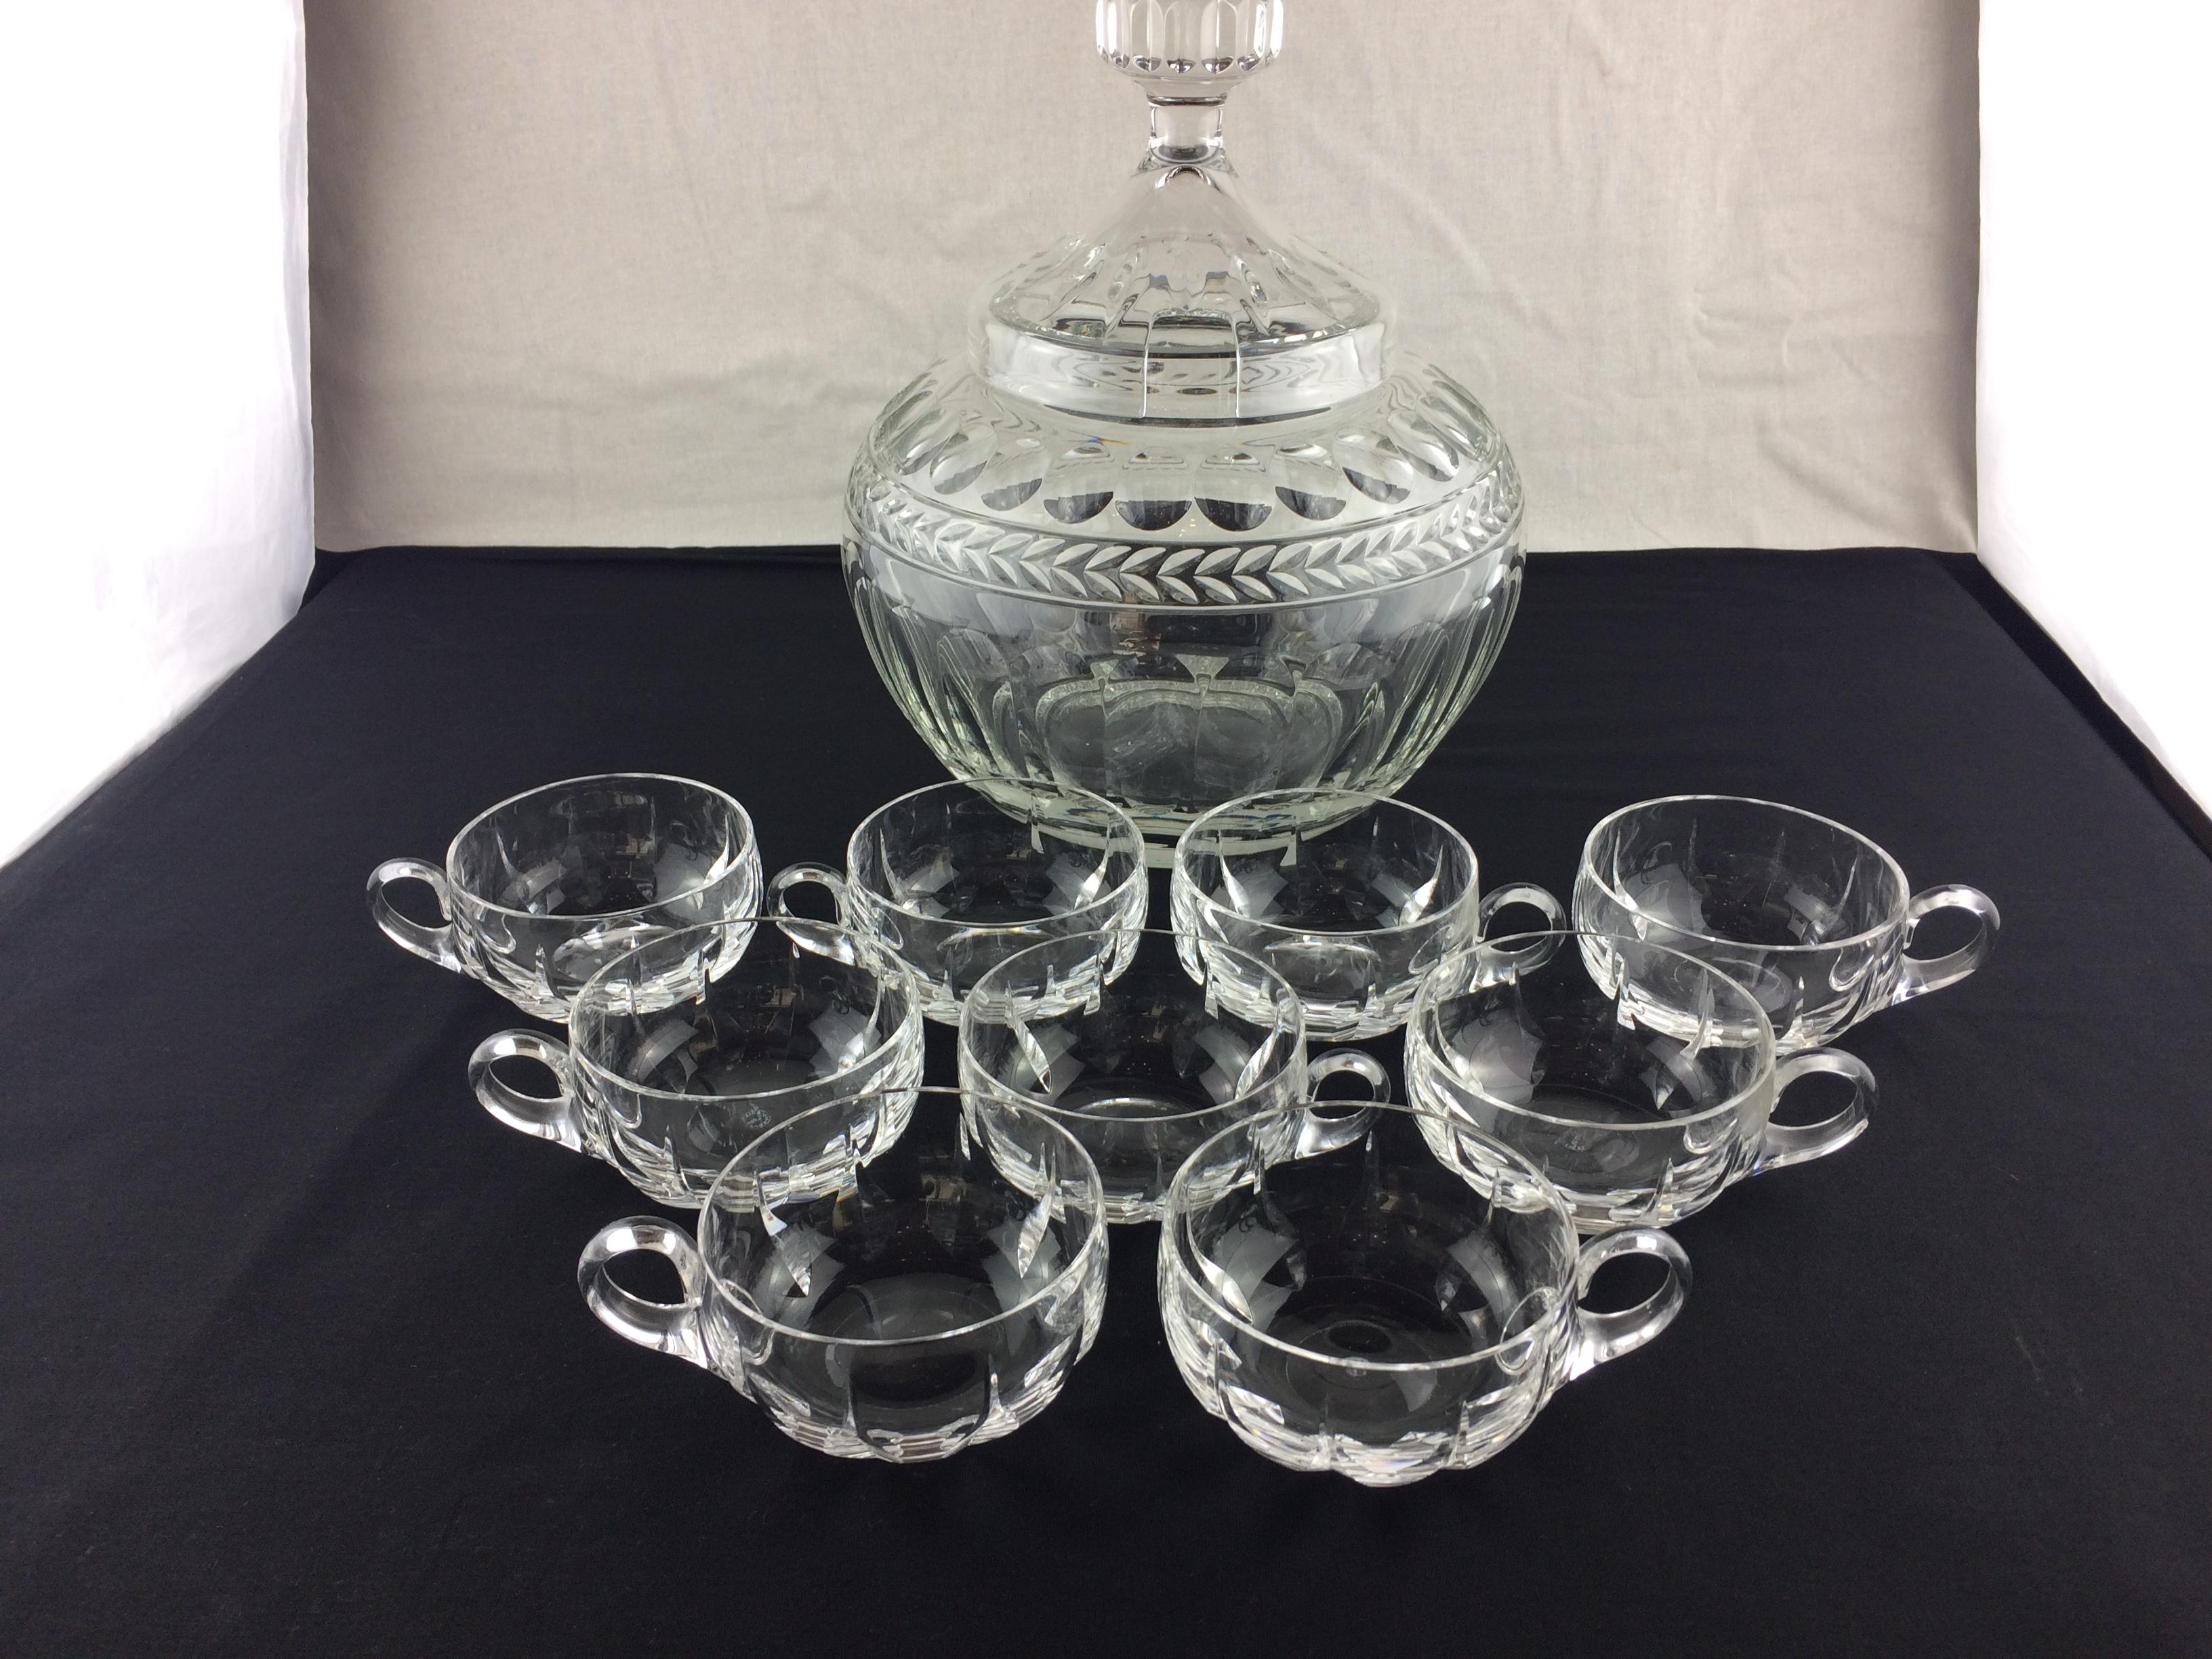 Elevate your home bar with this exquisite Saint Louis cut crystal liquor or punch service set. Crafted from high-quality crystal and glass by the renowned French manufacturer Saint Louis, this set features a captivating design with two offset rows